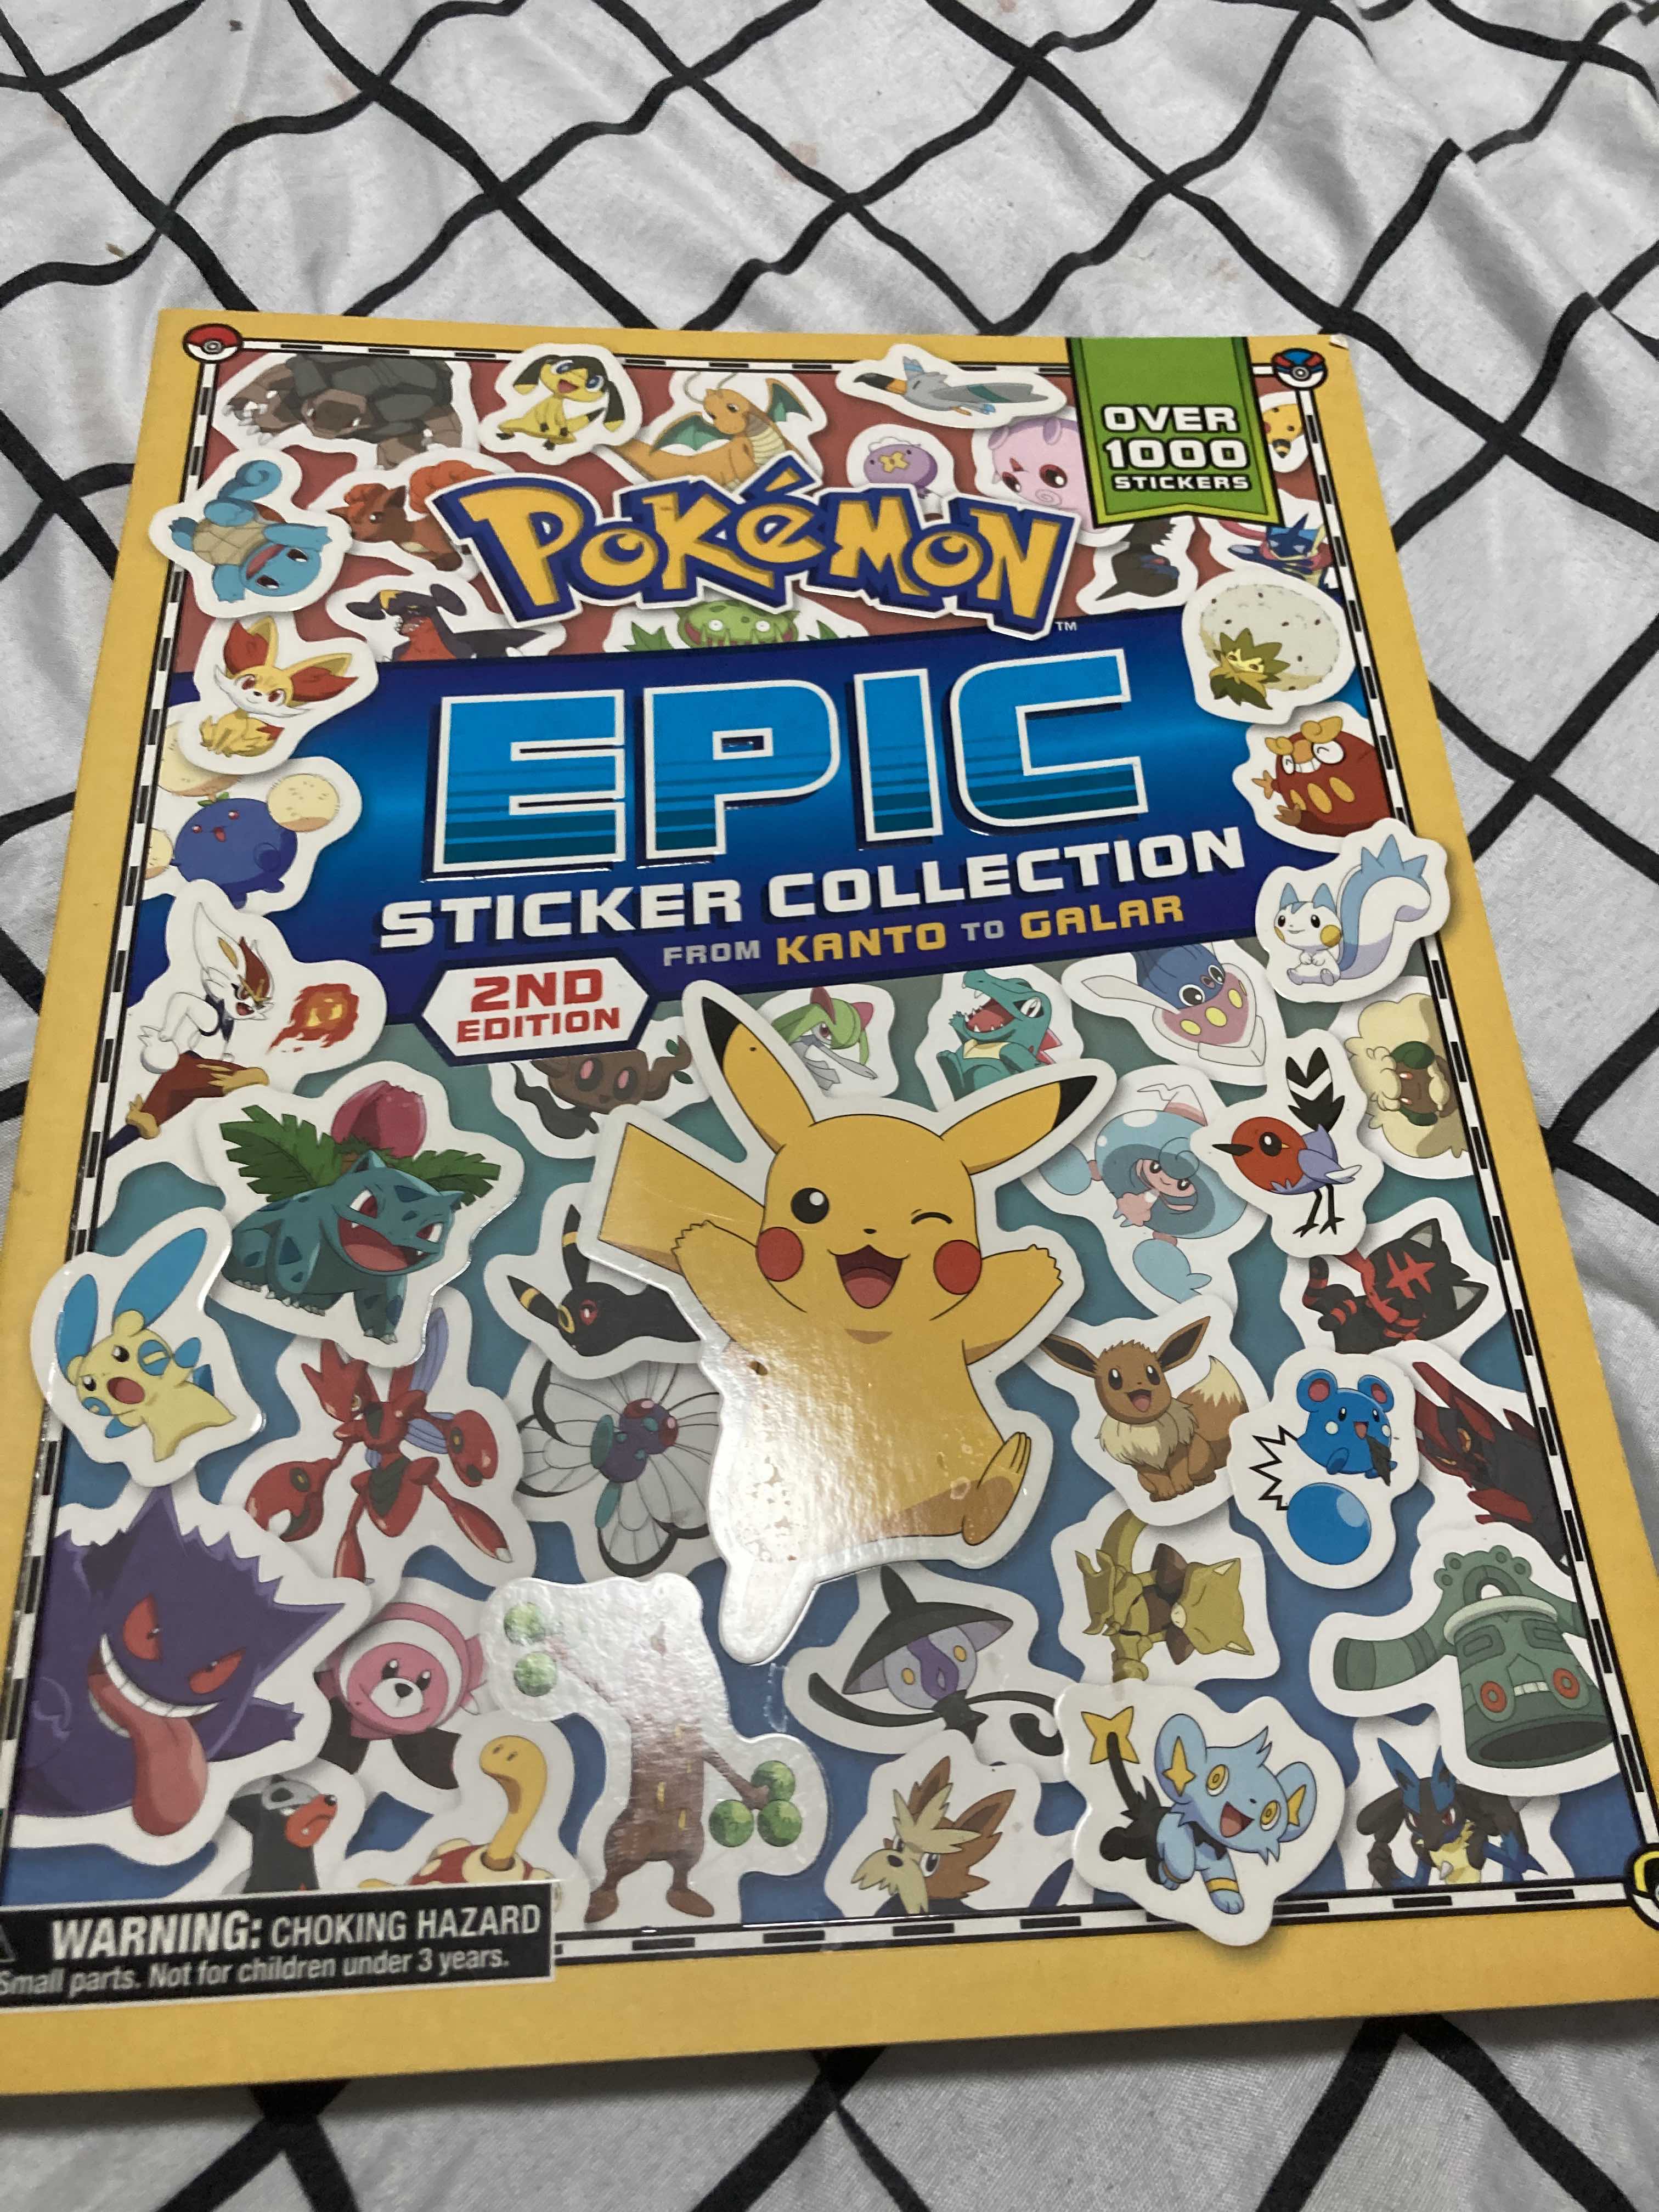  Pokémon Epic Sticker Collection 2nd Edition: From